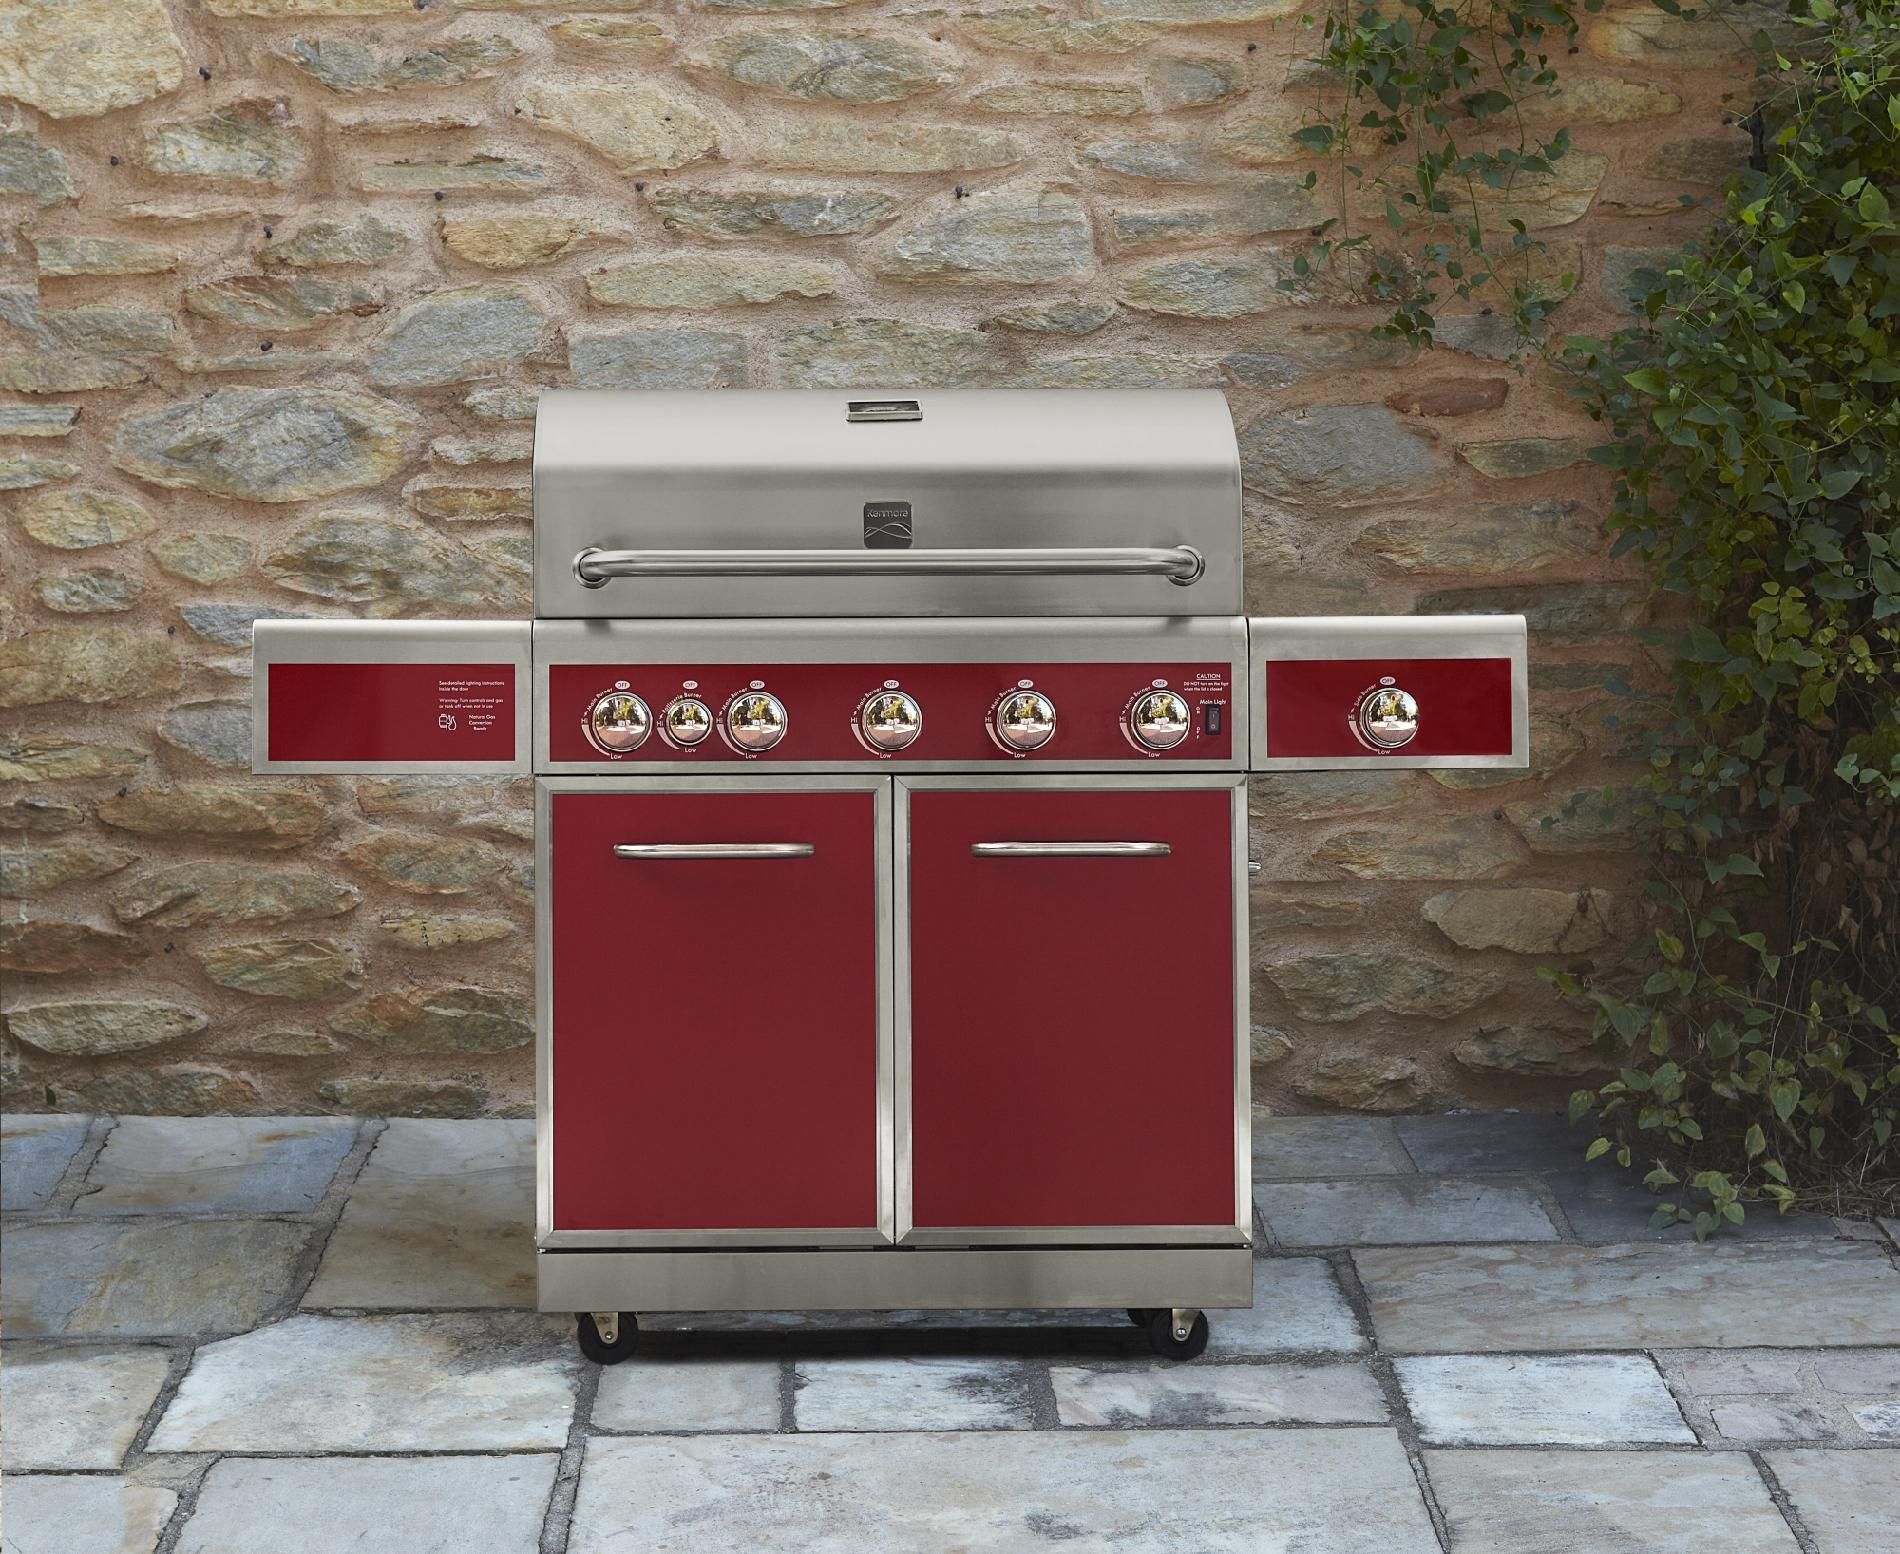 Kenmore 5-Burner Gas Grill with Ceramic Searing and Rotisserie Burners - Red